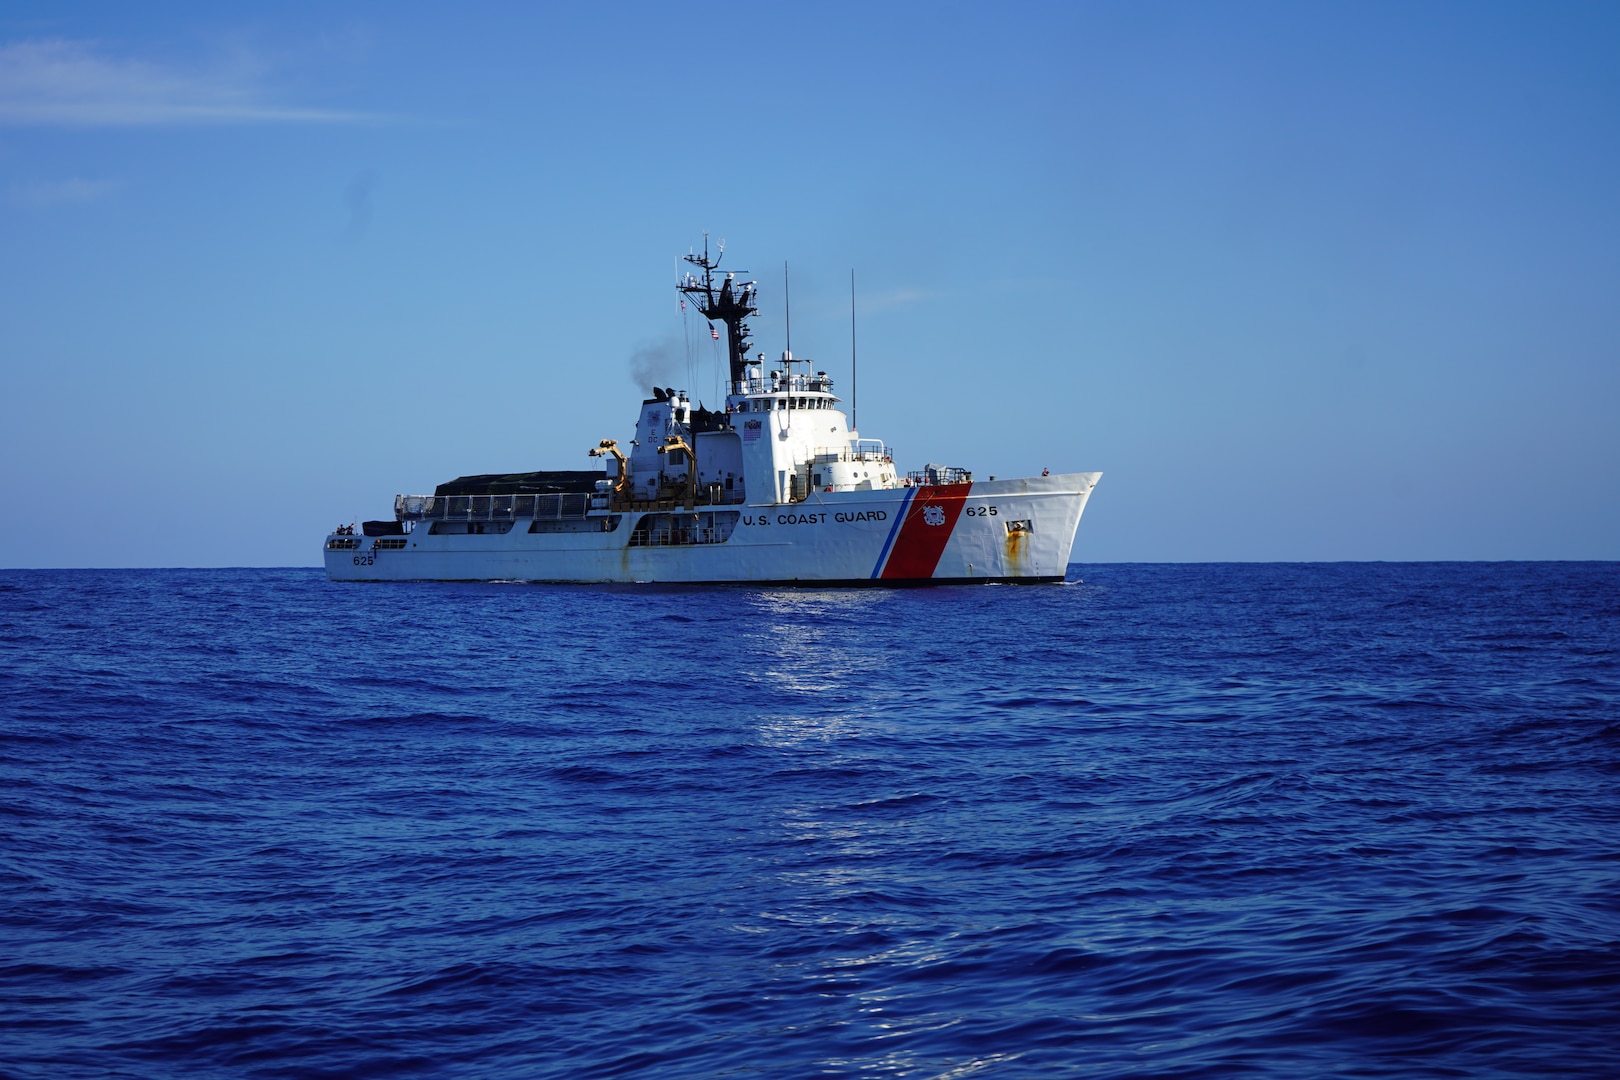 The crew of U.S. Coast Guard Cutter Venturous (WMEC 625) patrols near the coast of Haiti in support of Operation Vigilant Sentry, March 4, 2024.Venturous patrolled the South Florida Straits and Windward Passage within the Coast Guard Seventh District’s area of responsibility to conduct maritime safety and security missions while working to detect, deter, and intercept unsafe and unlawful migrant ventures bound for the United States.